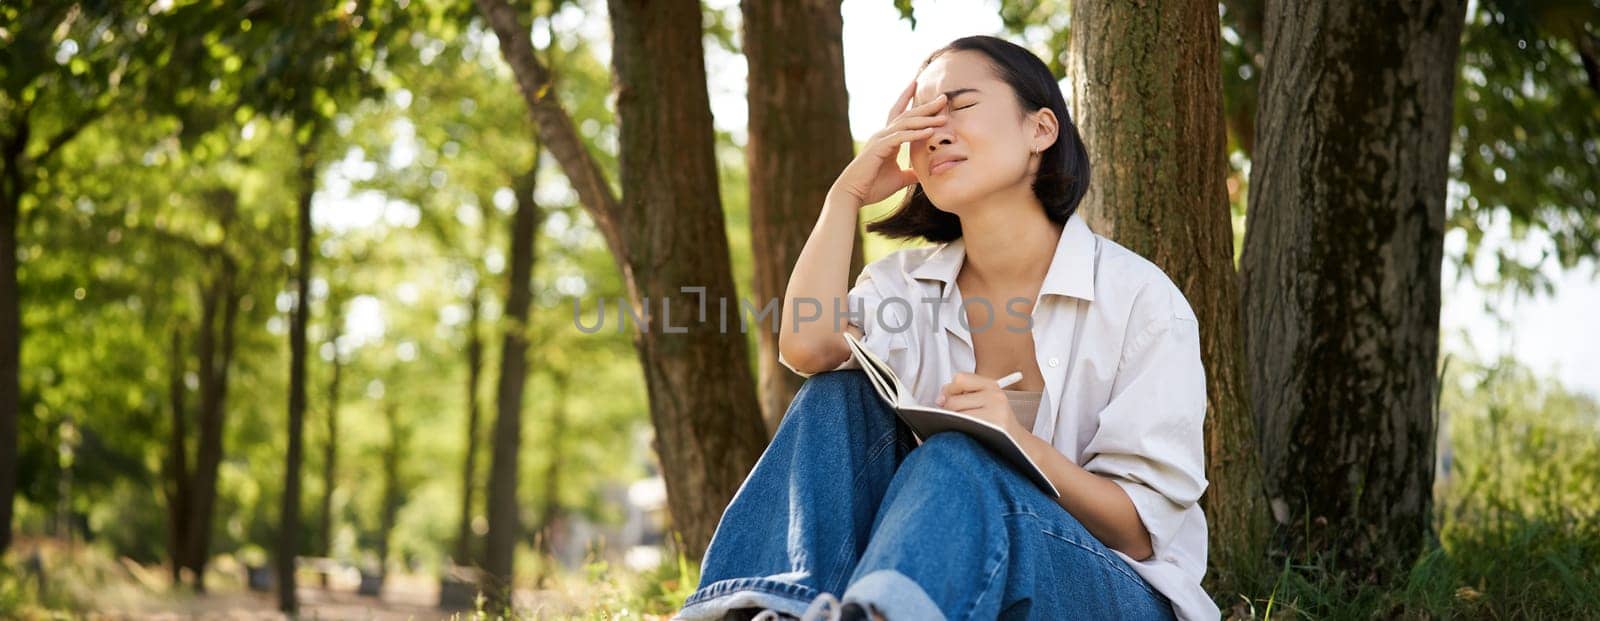 Portrait of sad asian girl writing in her diary and feeling uneasy, sitting in park alone under tree, expressing her distress in notebook.